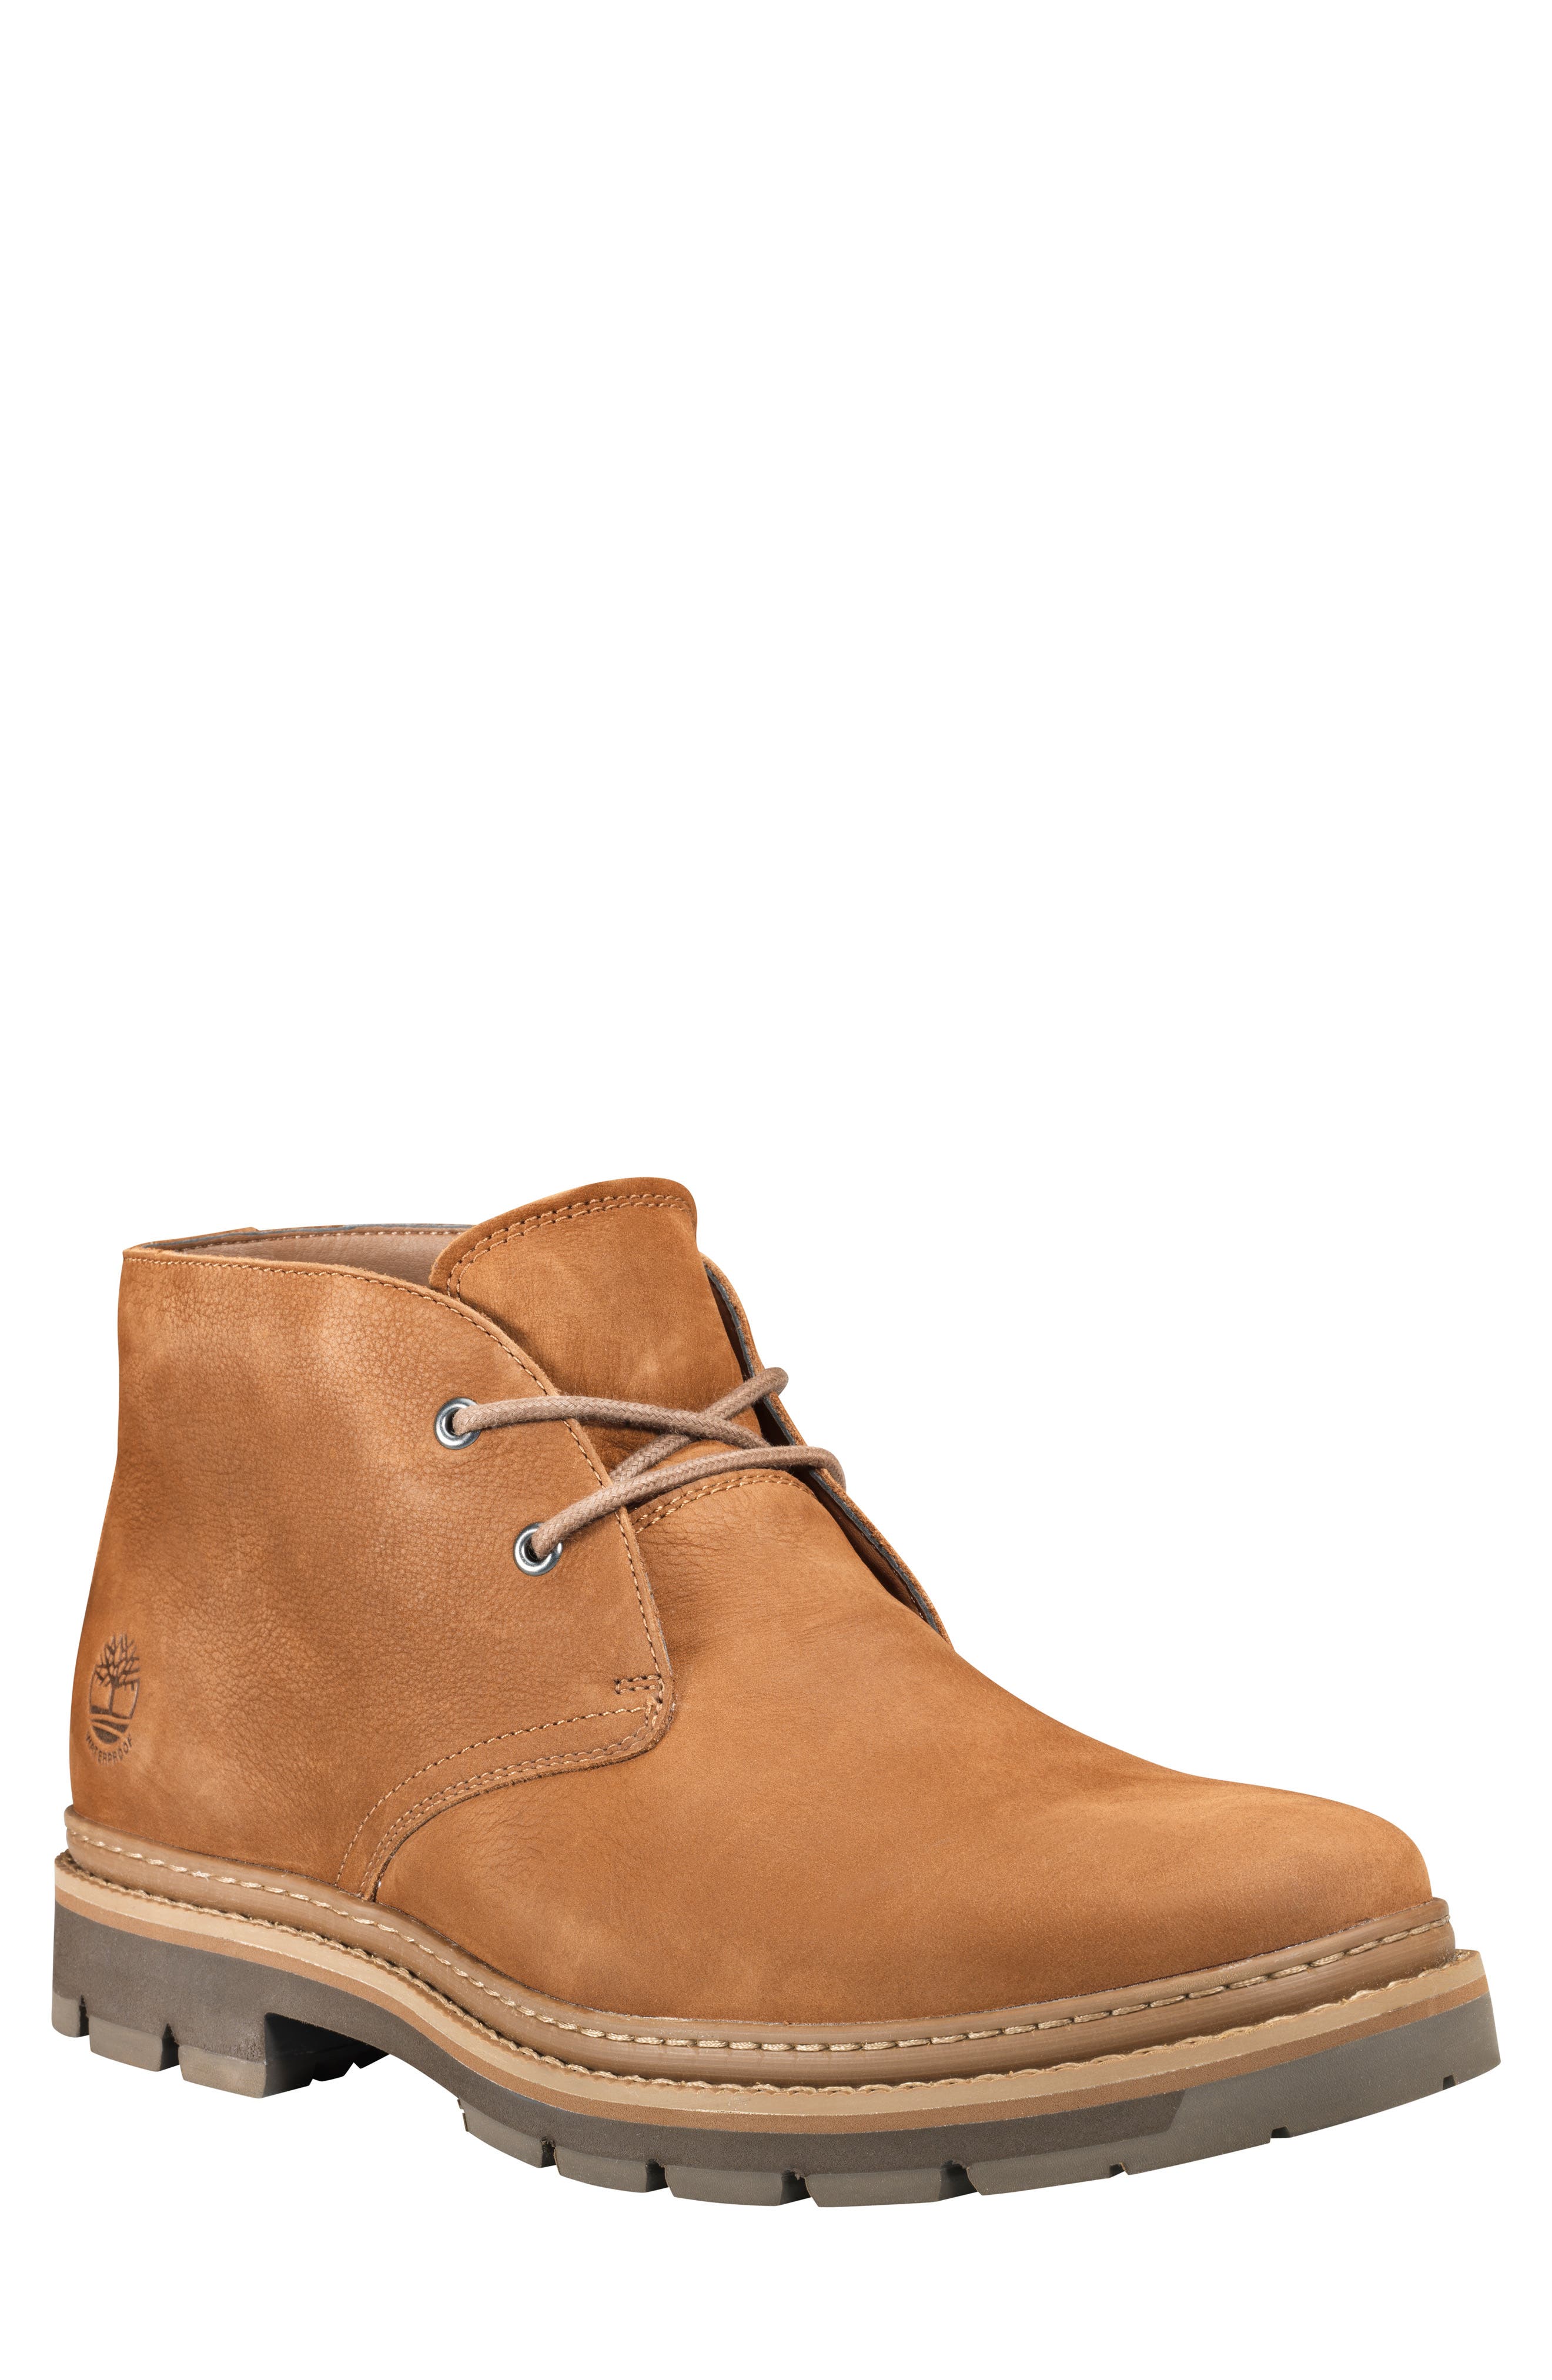 Mens Timberland Boots | Nordstrom